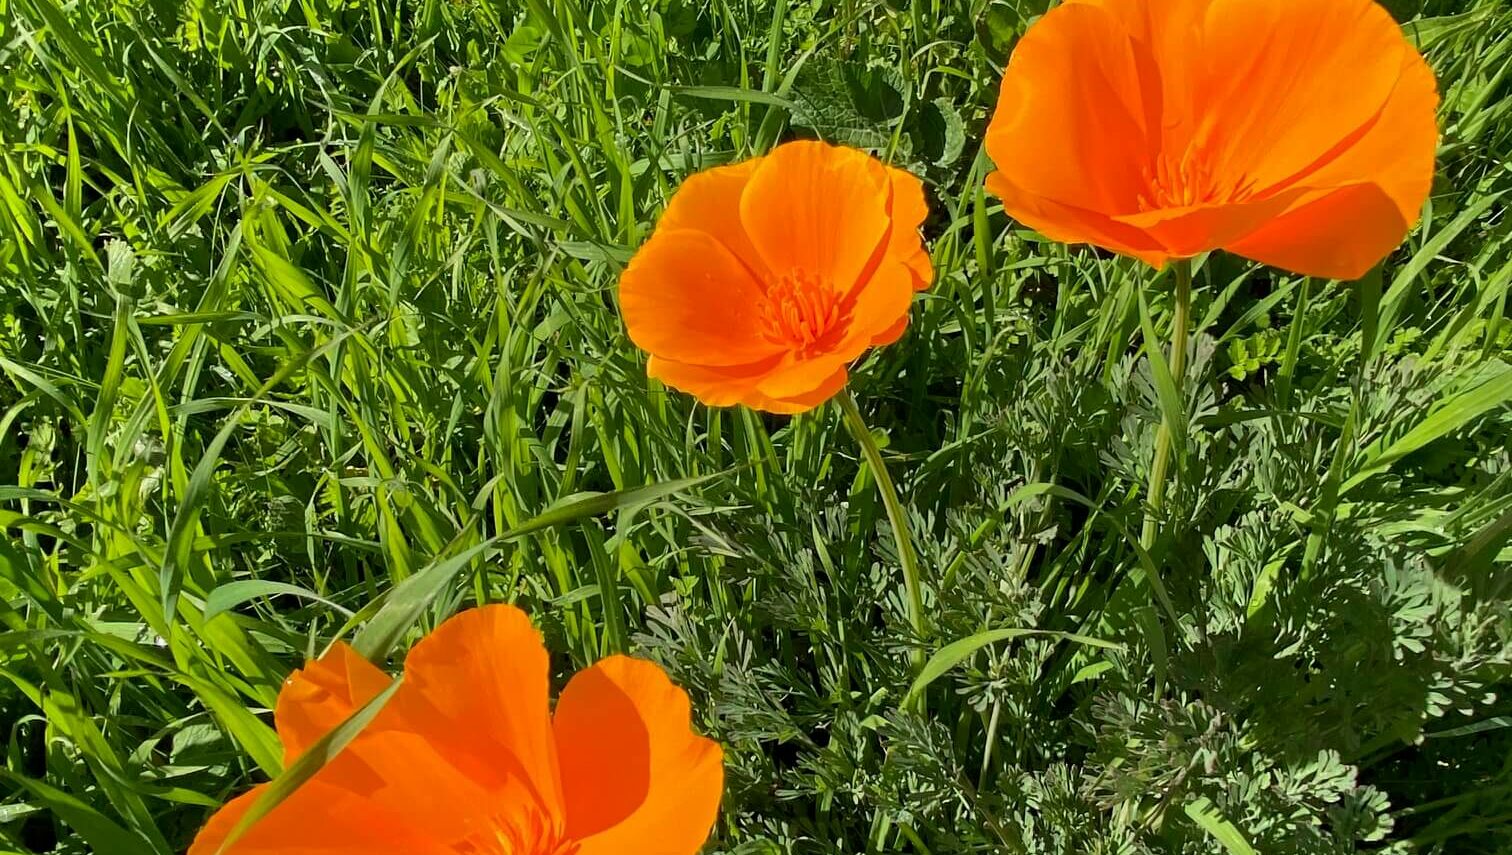 Bright orange poppies in full bloom with green background